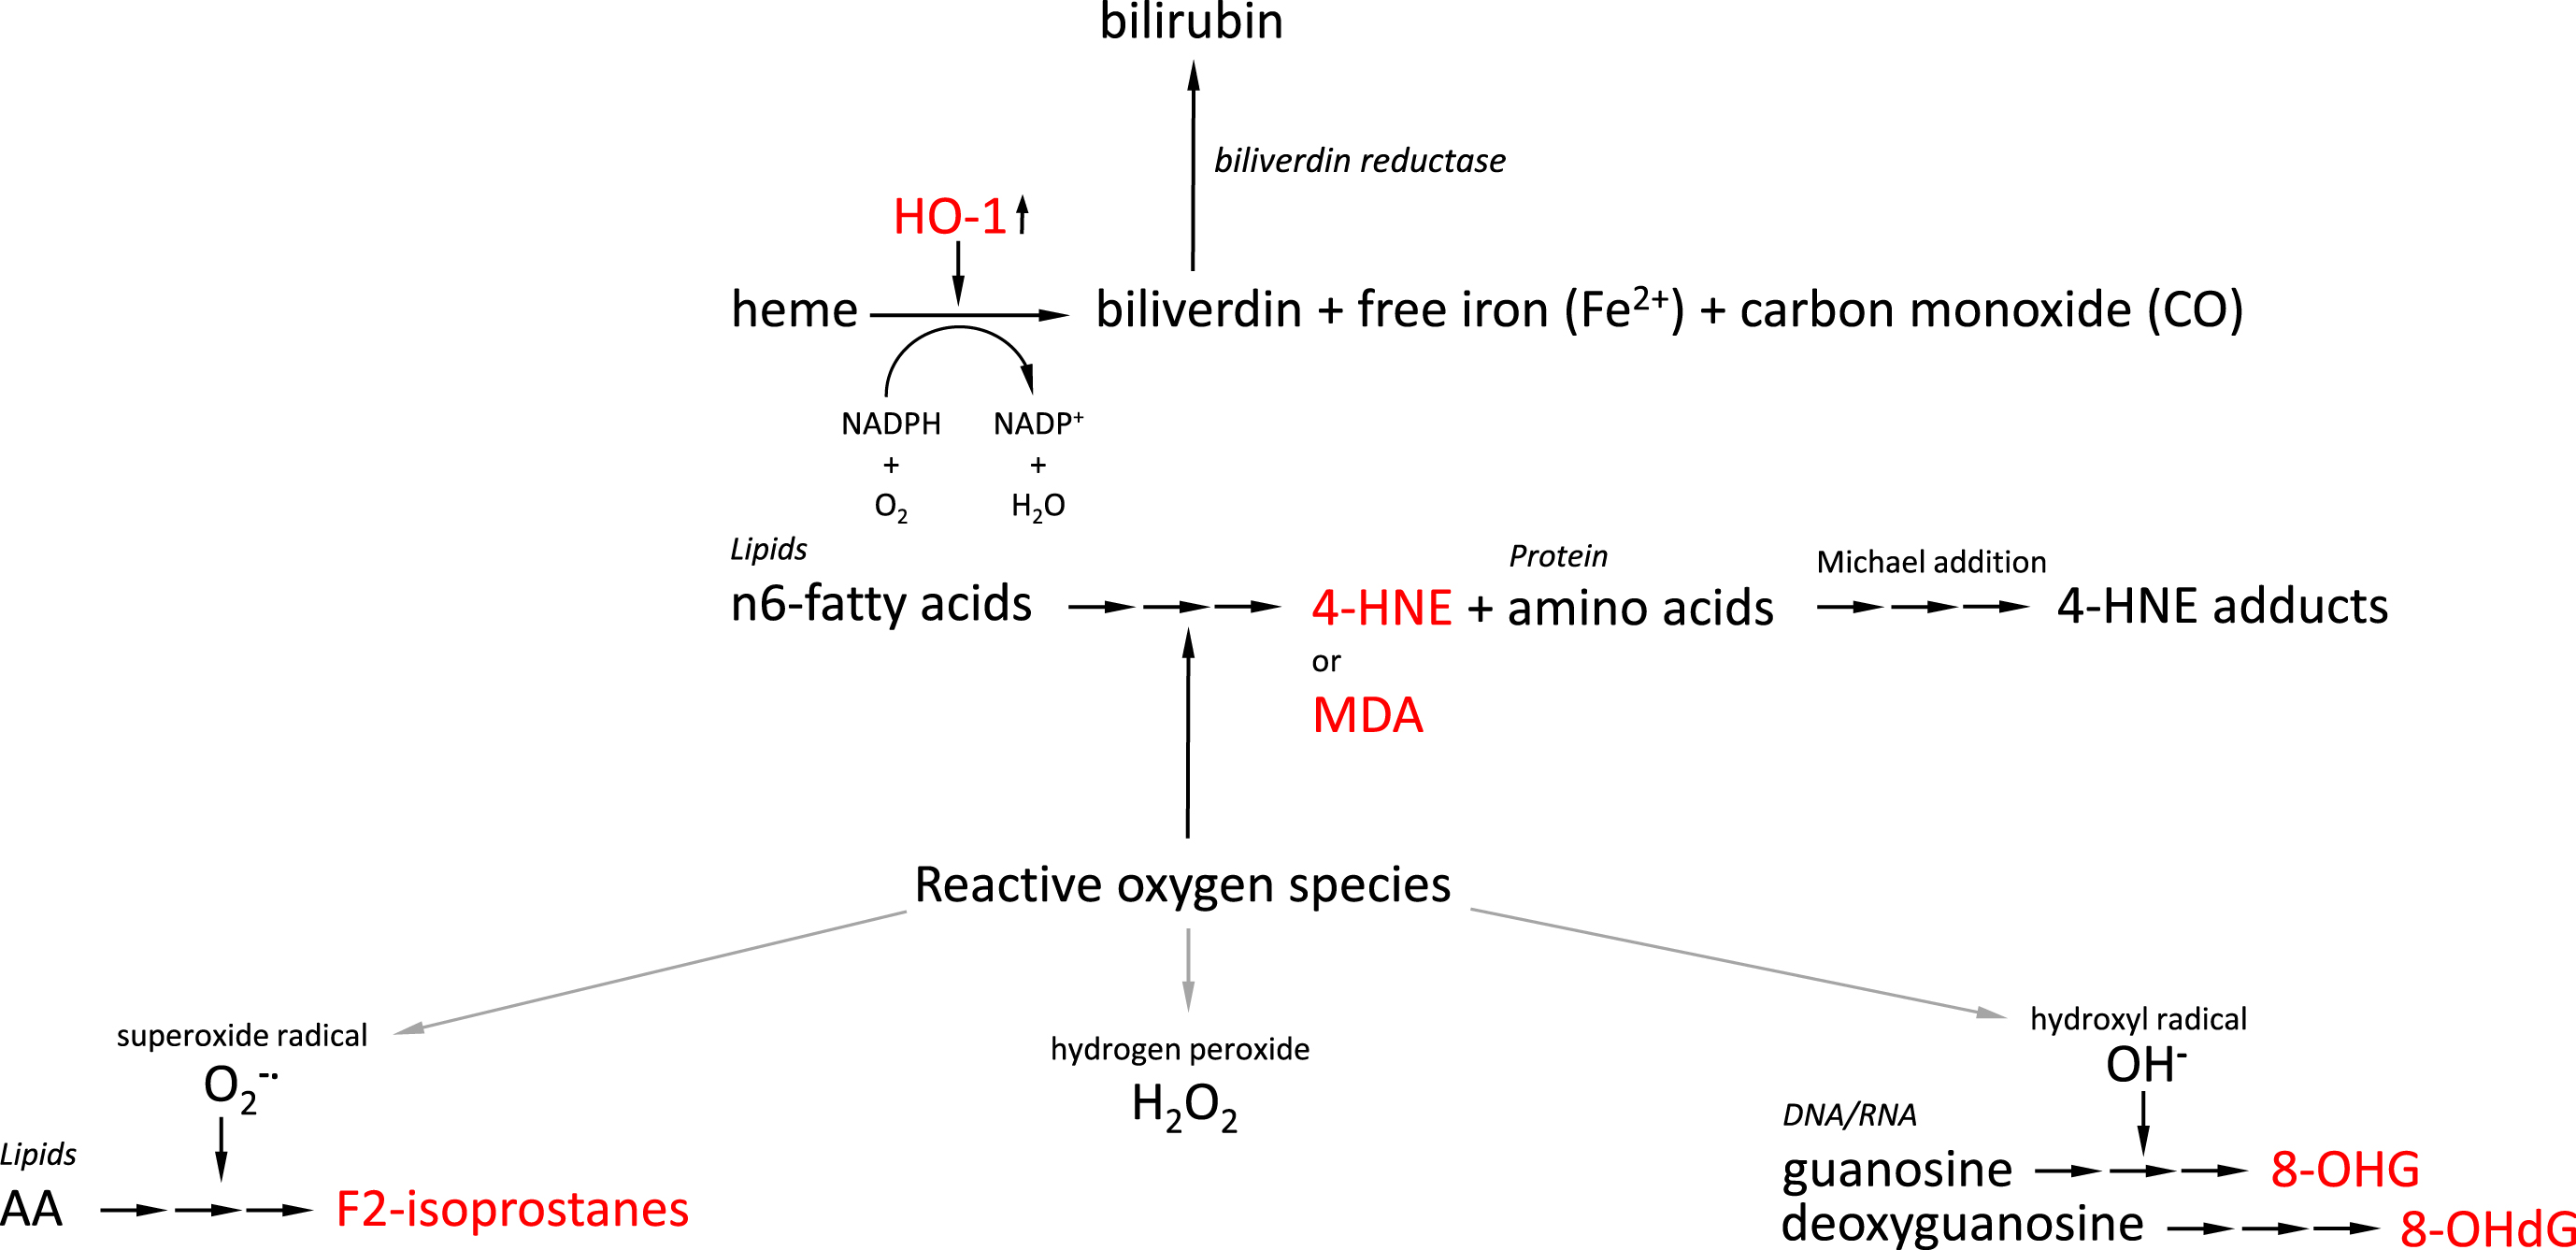 Overview of generation of AD-related oxidative stress-induced biomarkers. Interrupted arrows indicate multi-step conversion processes. AD-related oxidative stress-induced biomarkers are indicated in red. AA, arachidonic acid; HO-1, heme oxygenase 1; 4-HNE, 4-hydroxynonenal; MDA, malondialdehyde; 8-OHG, 8-hydroxyguanosine; 8-OHdG, 8-hydroxy-2’-deoxygyguanosine.